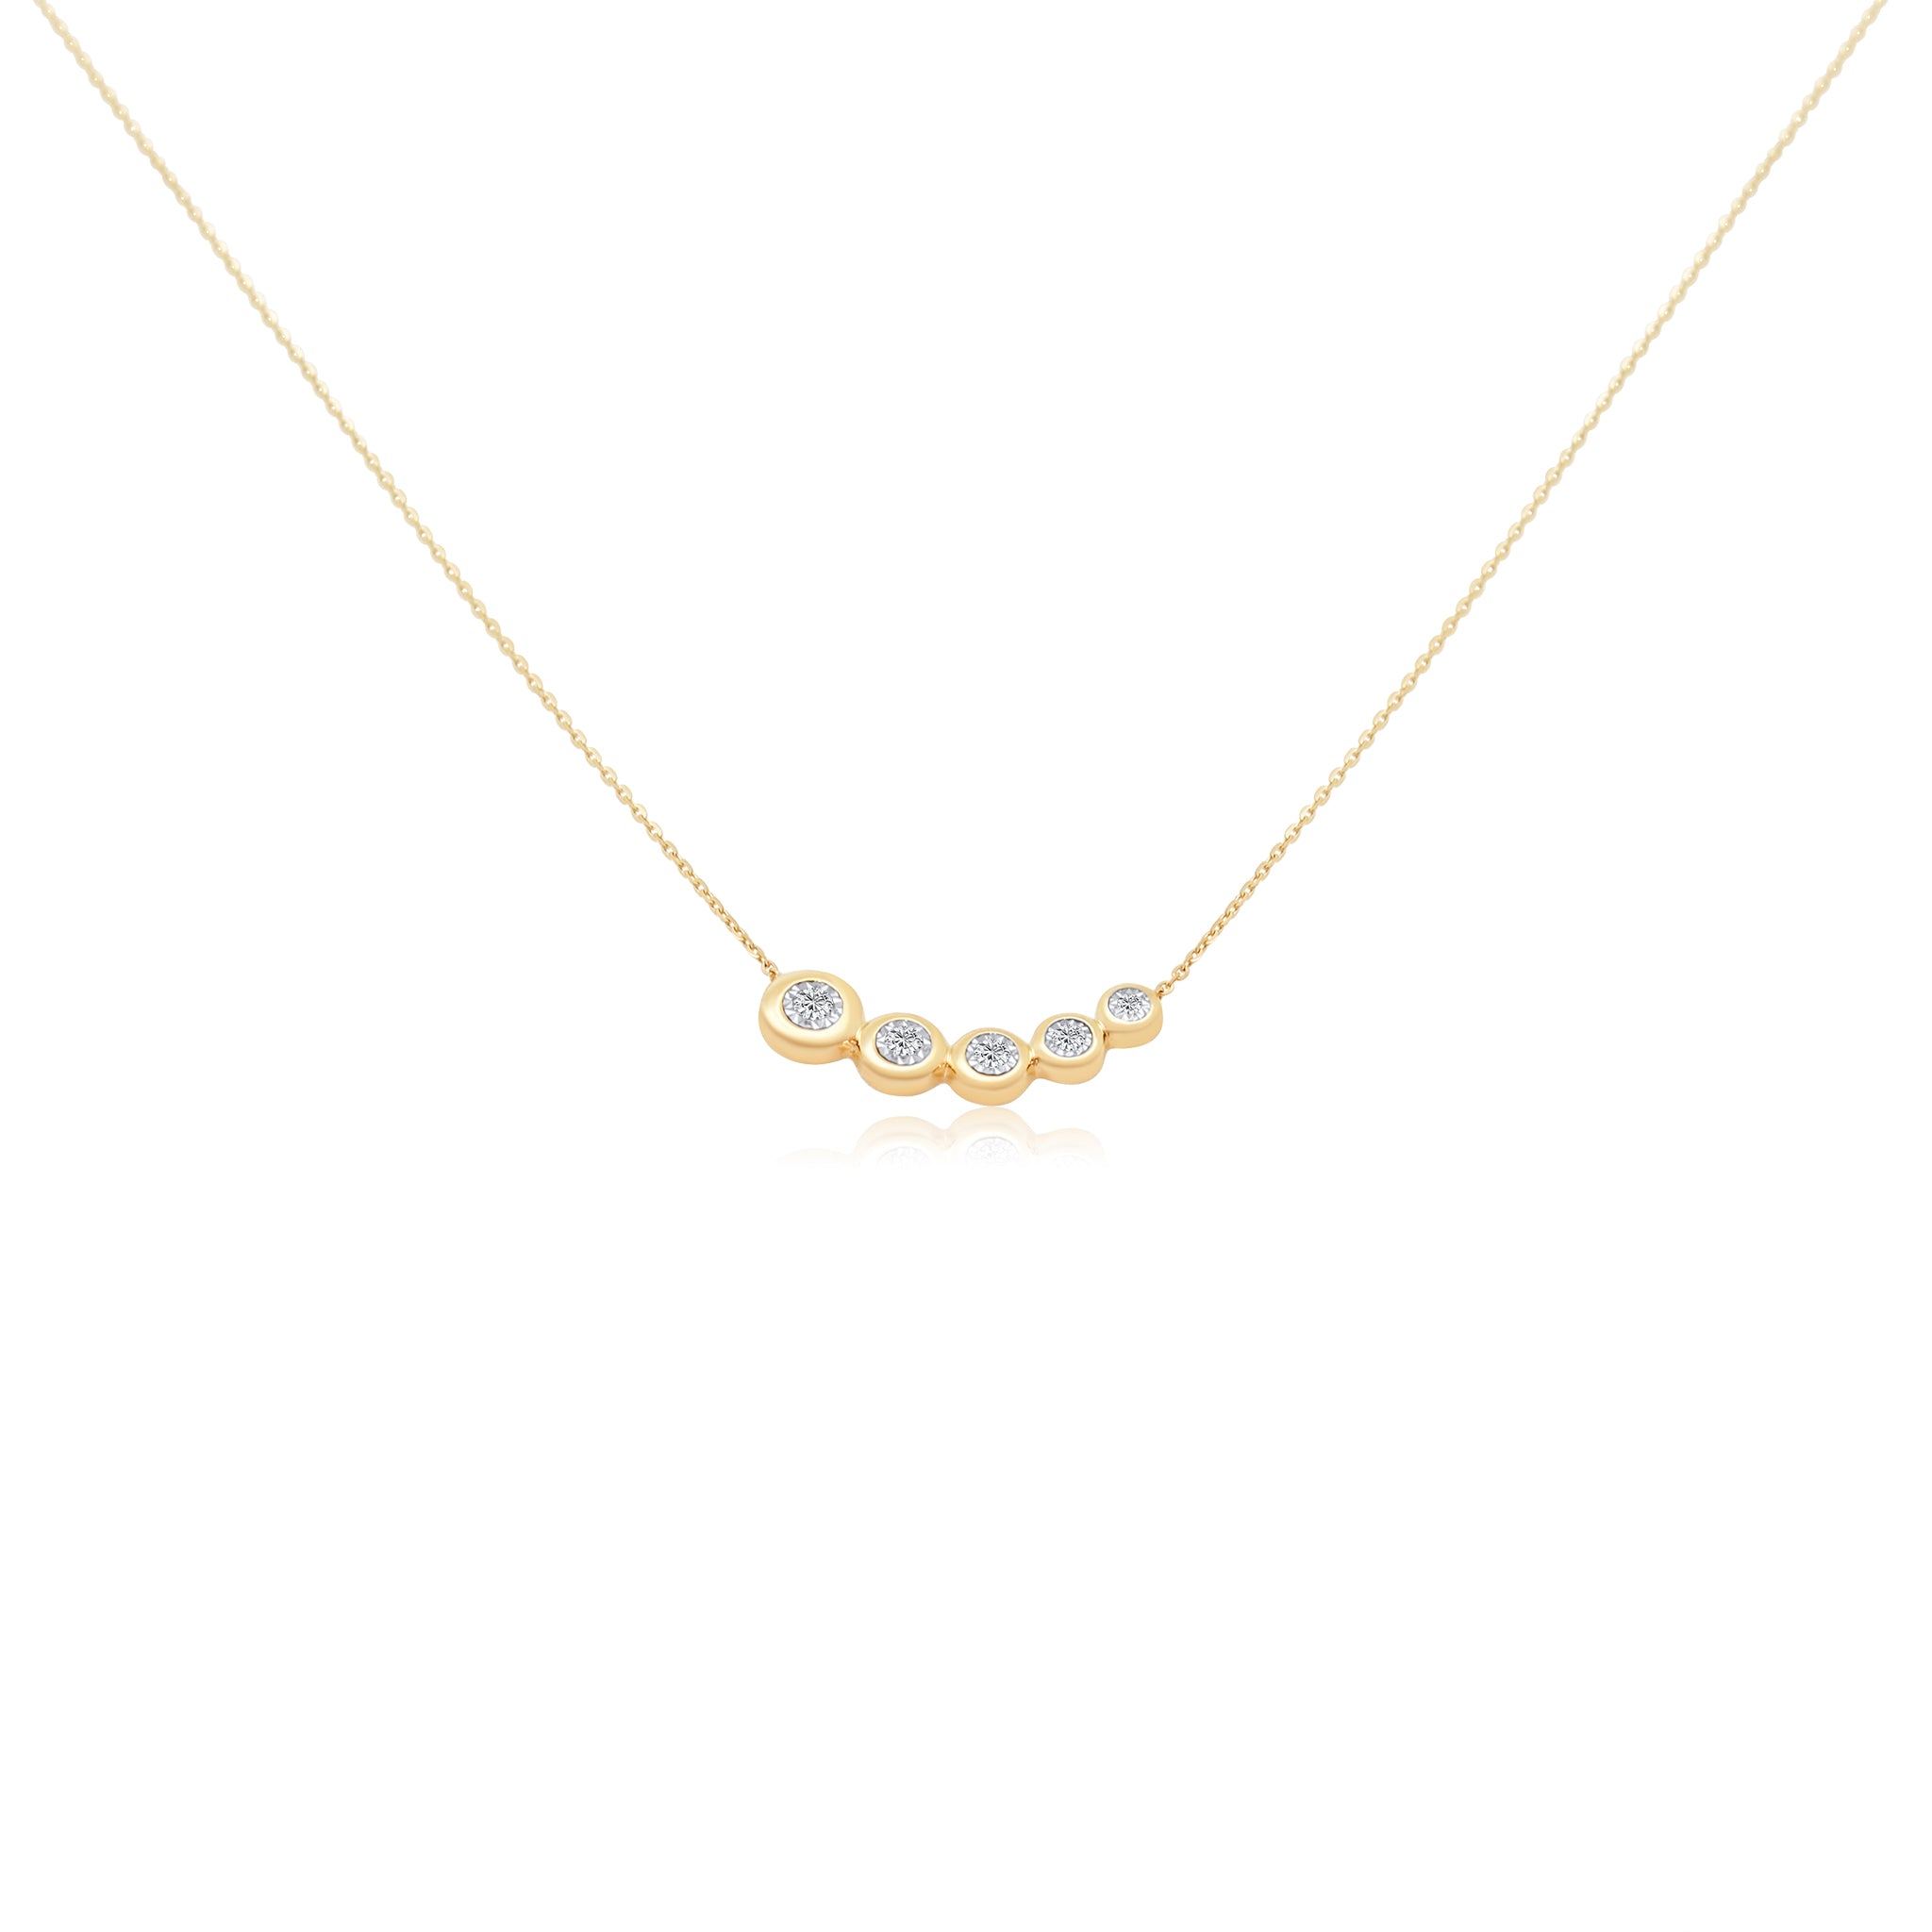 Roberto Coin Five Diamond Necklace in 18K Gold